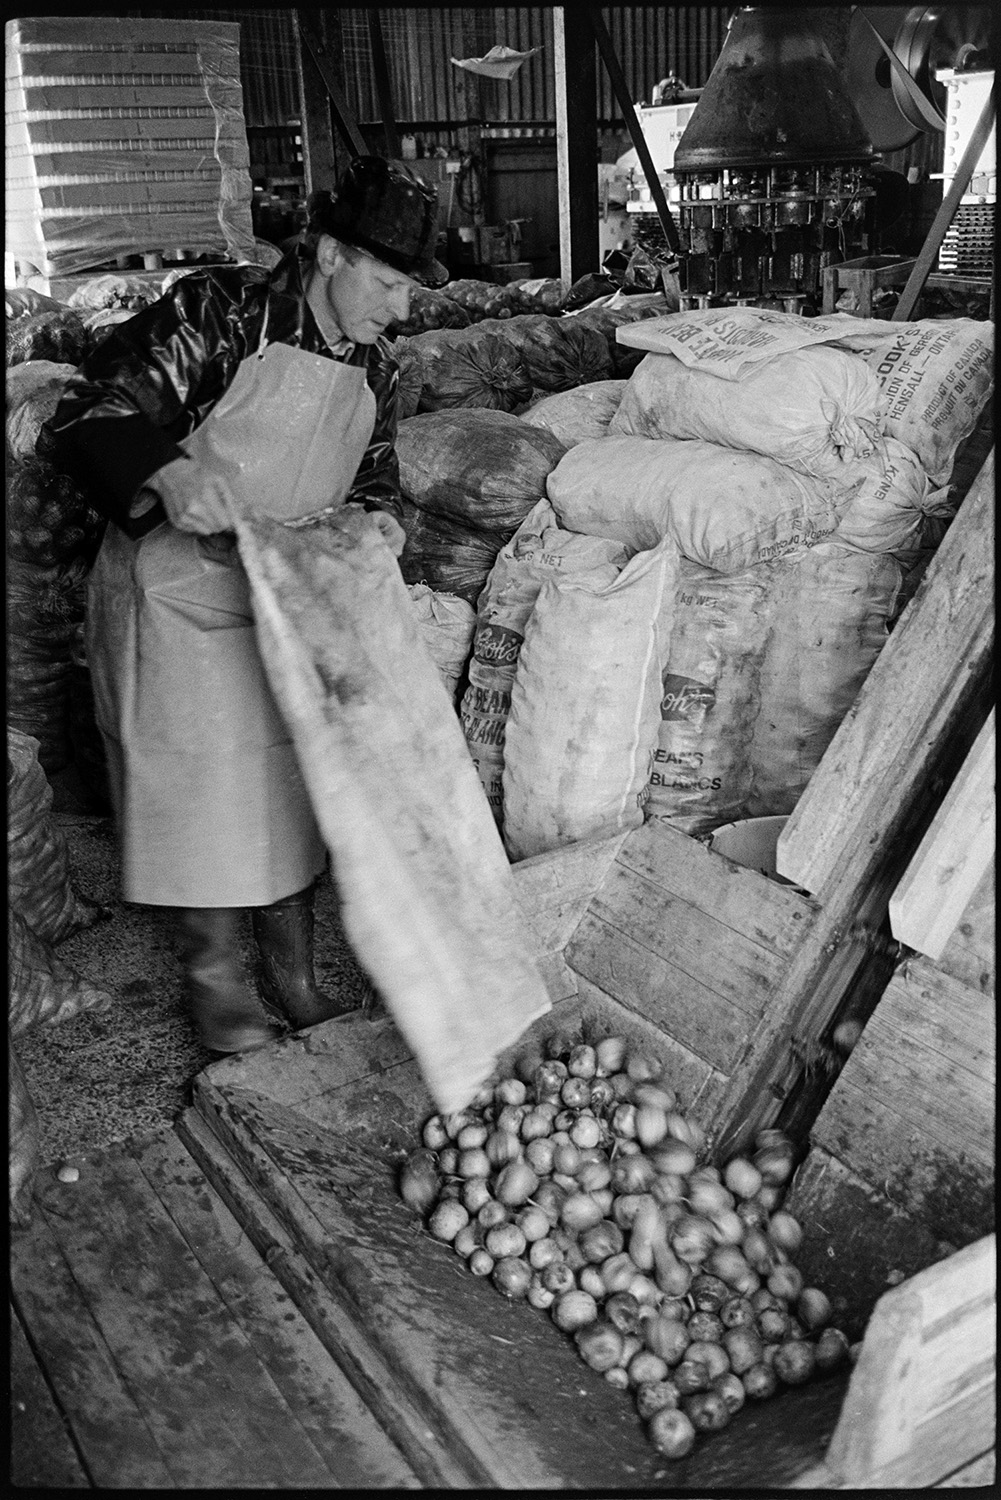 Cider making, men operating cider press in factory. 
[A man emptying a sack of apples into a crusher at Hancock's cider factory at Clapworthy Mill, South Molton. Other sacks of apples can be seen in the background.]